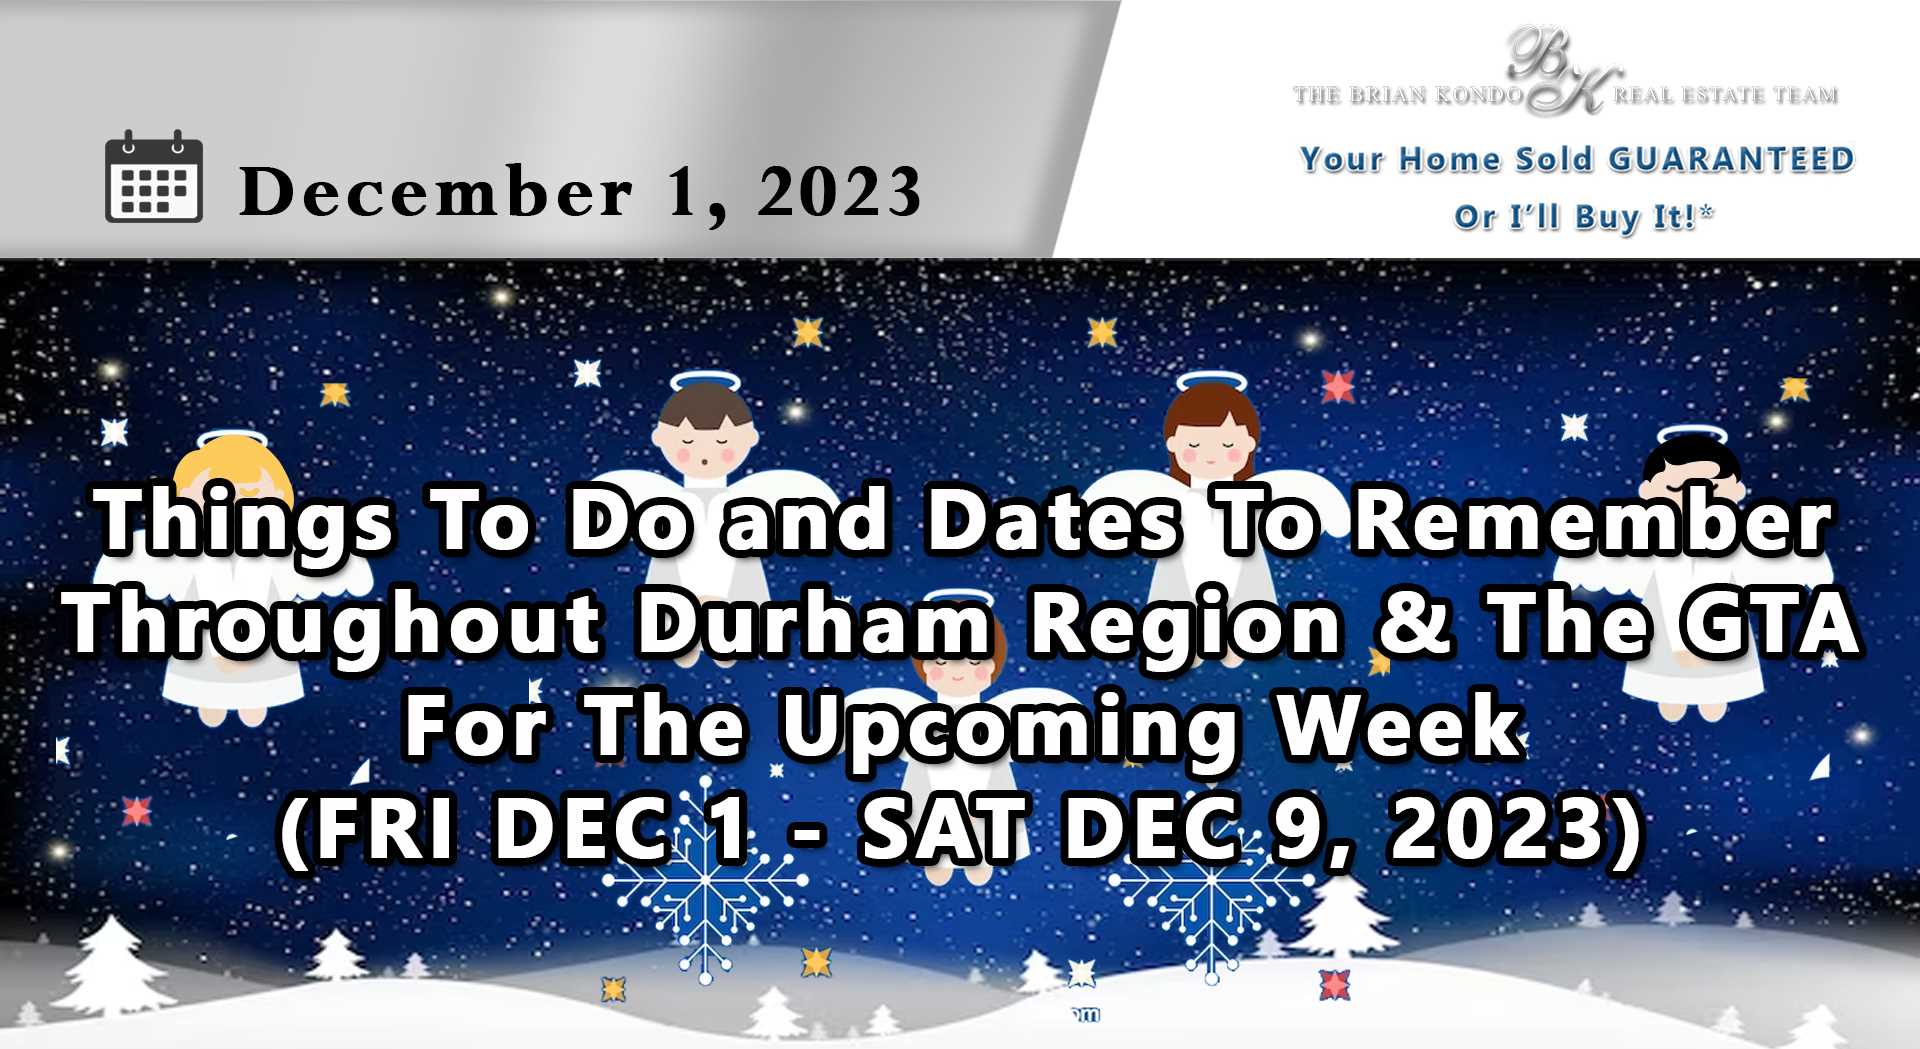 Things To Do and Dates To Remember Throughout Durham Region and The GTA For The Upcoming Week (FRI DEC 1- SAT DEC 9, 2023)